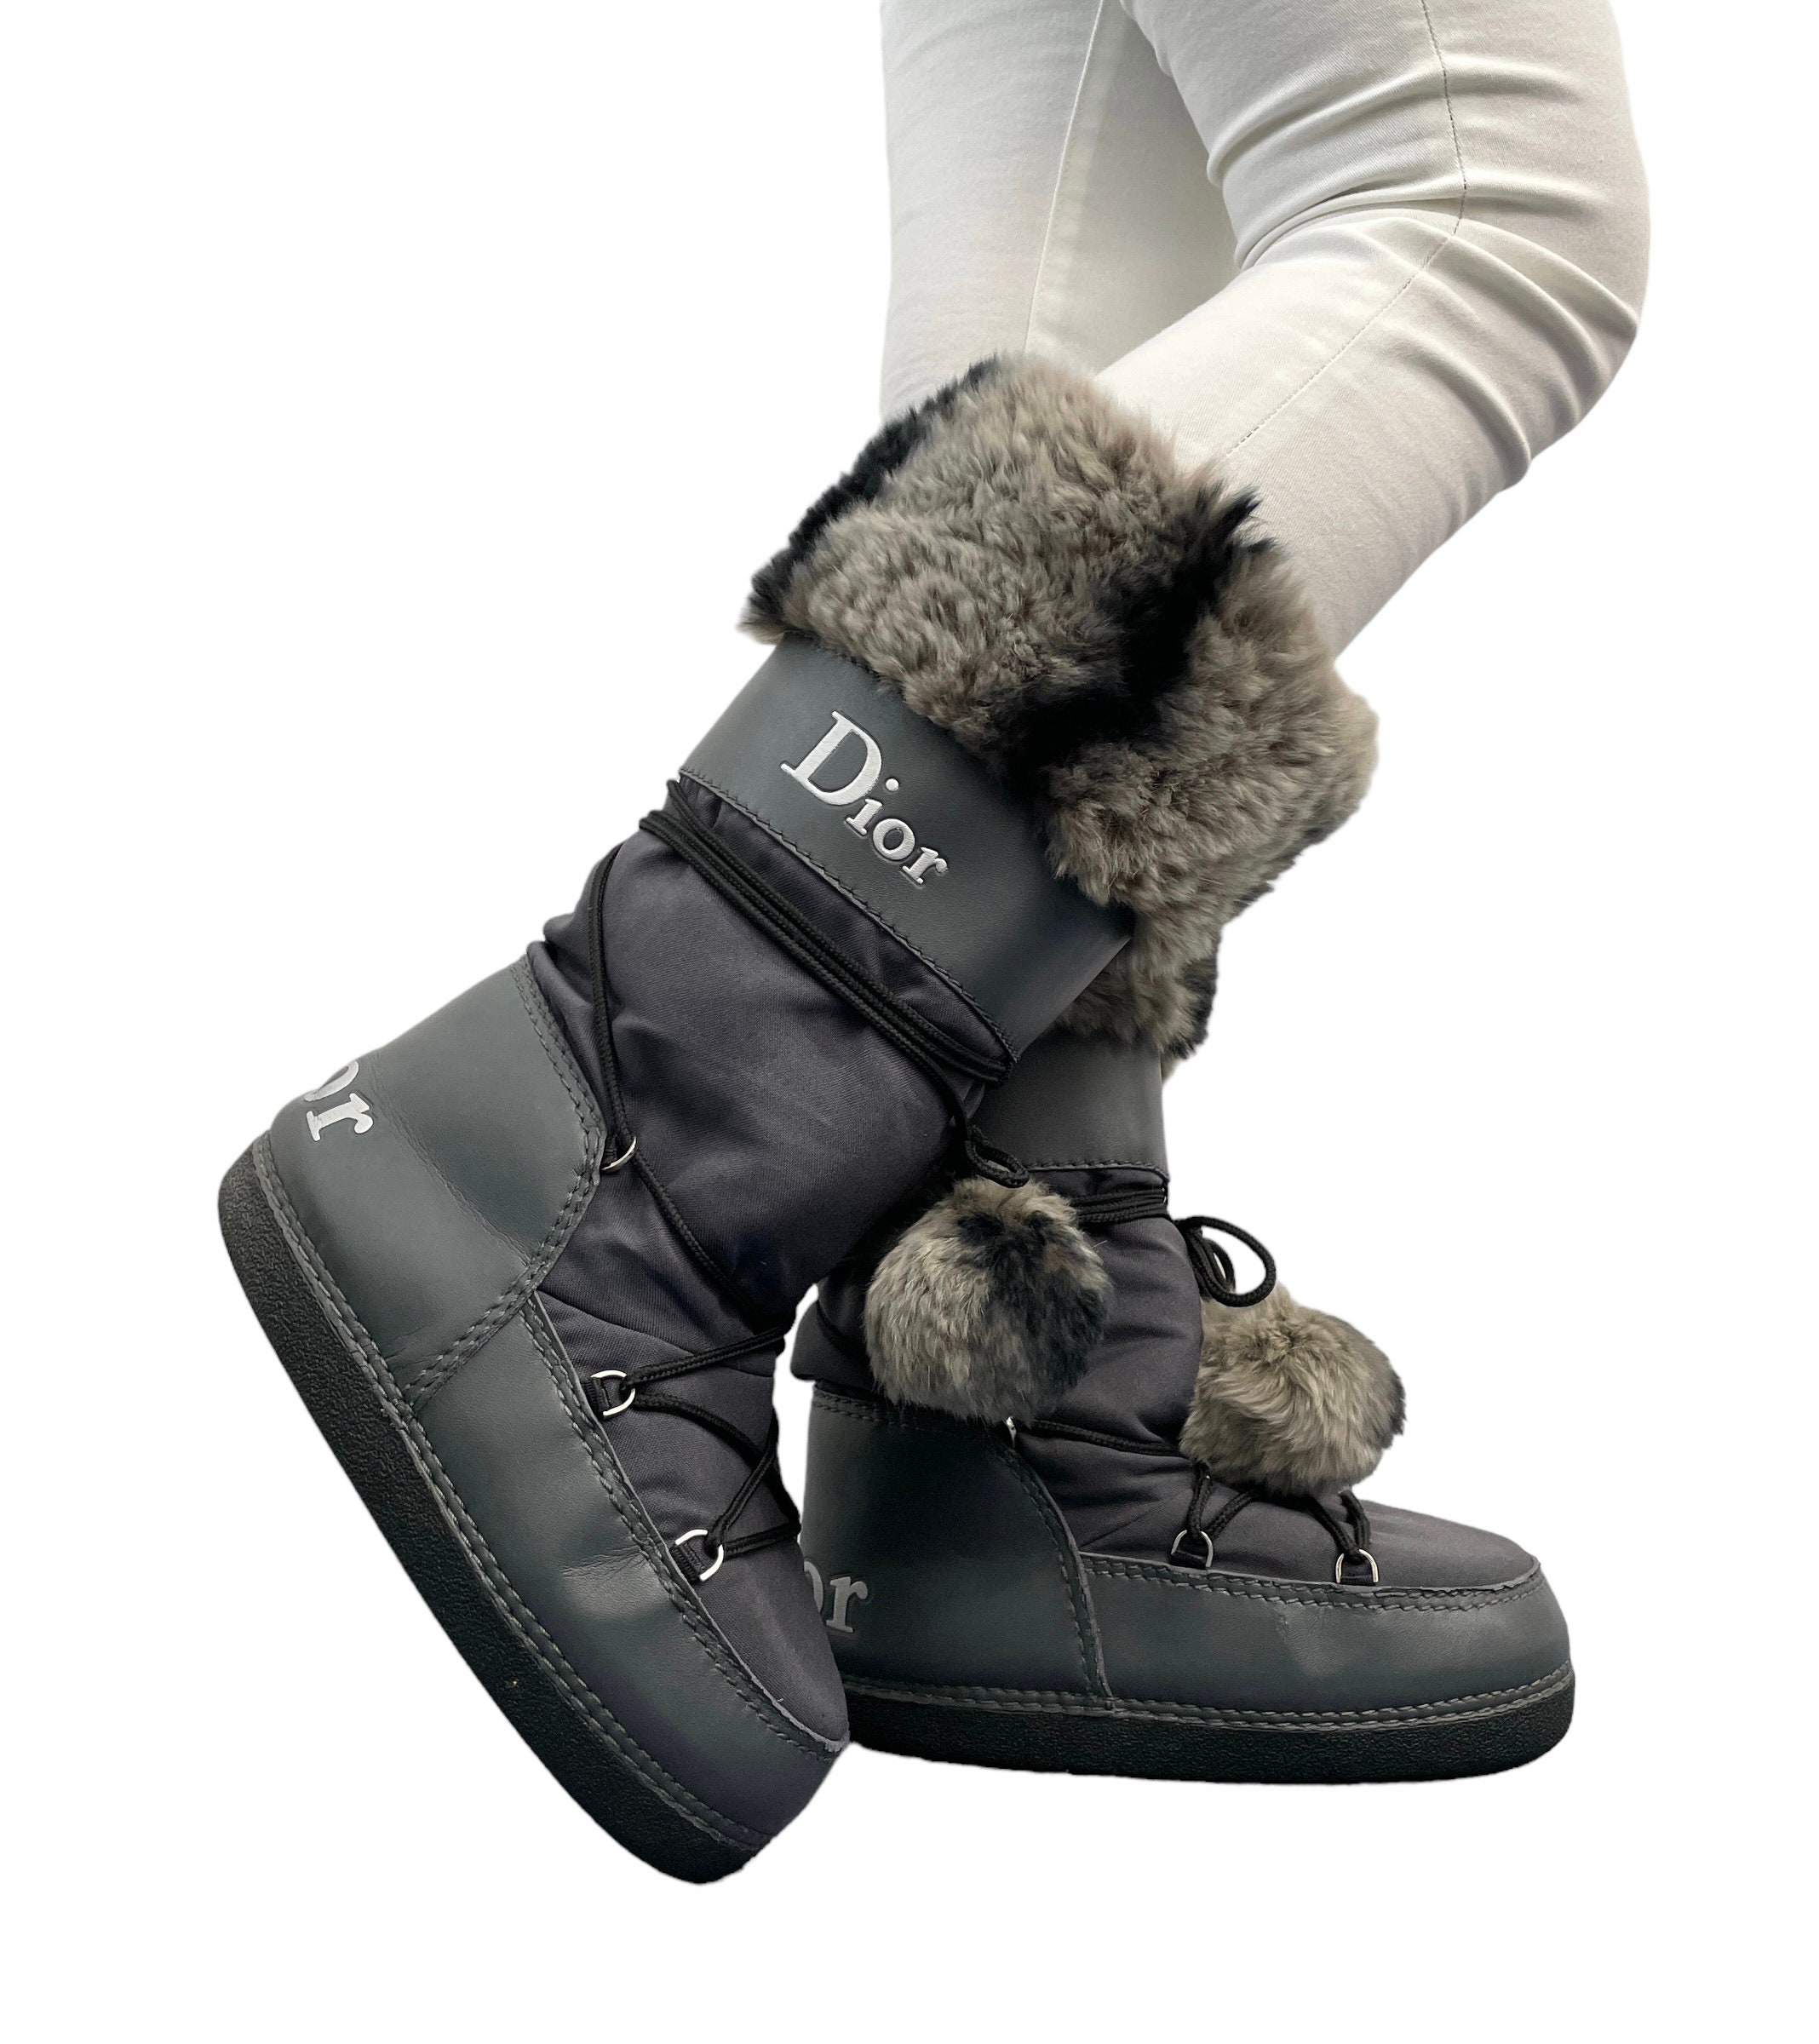 Dior White Leather and Fur Lace Up Snow Boots Size 35 Dior